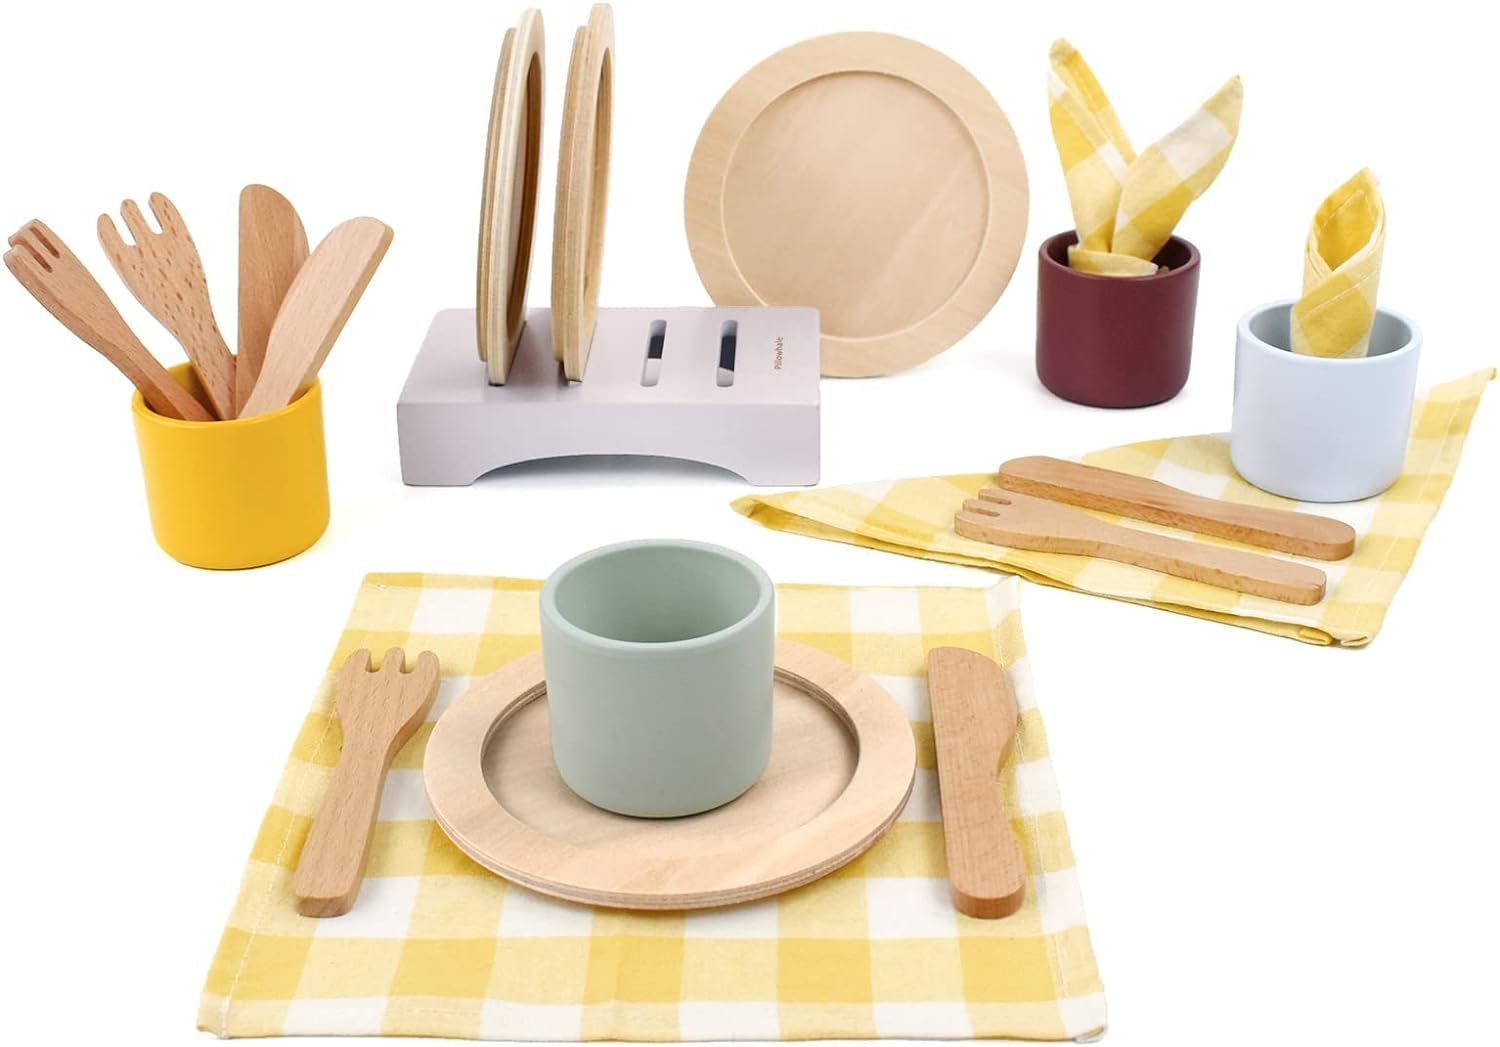 Wooden Toy Plates and Dishes Set,Play Kitchen Cutlery and Plate Set,21Piece Kids Kitchen Playset ... | Amazon (US)